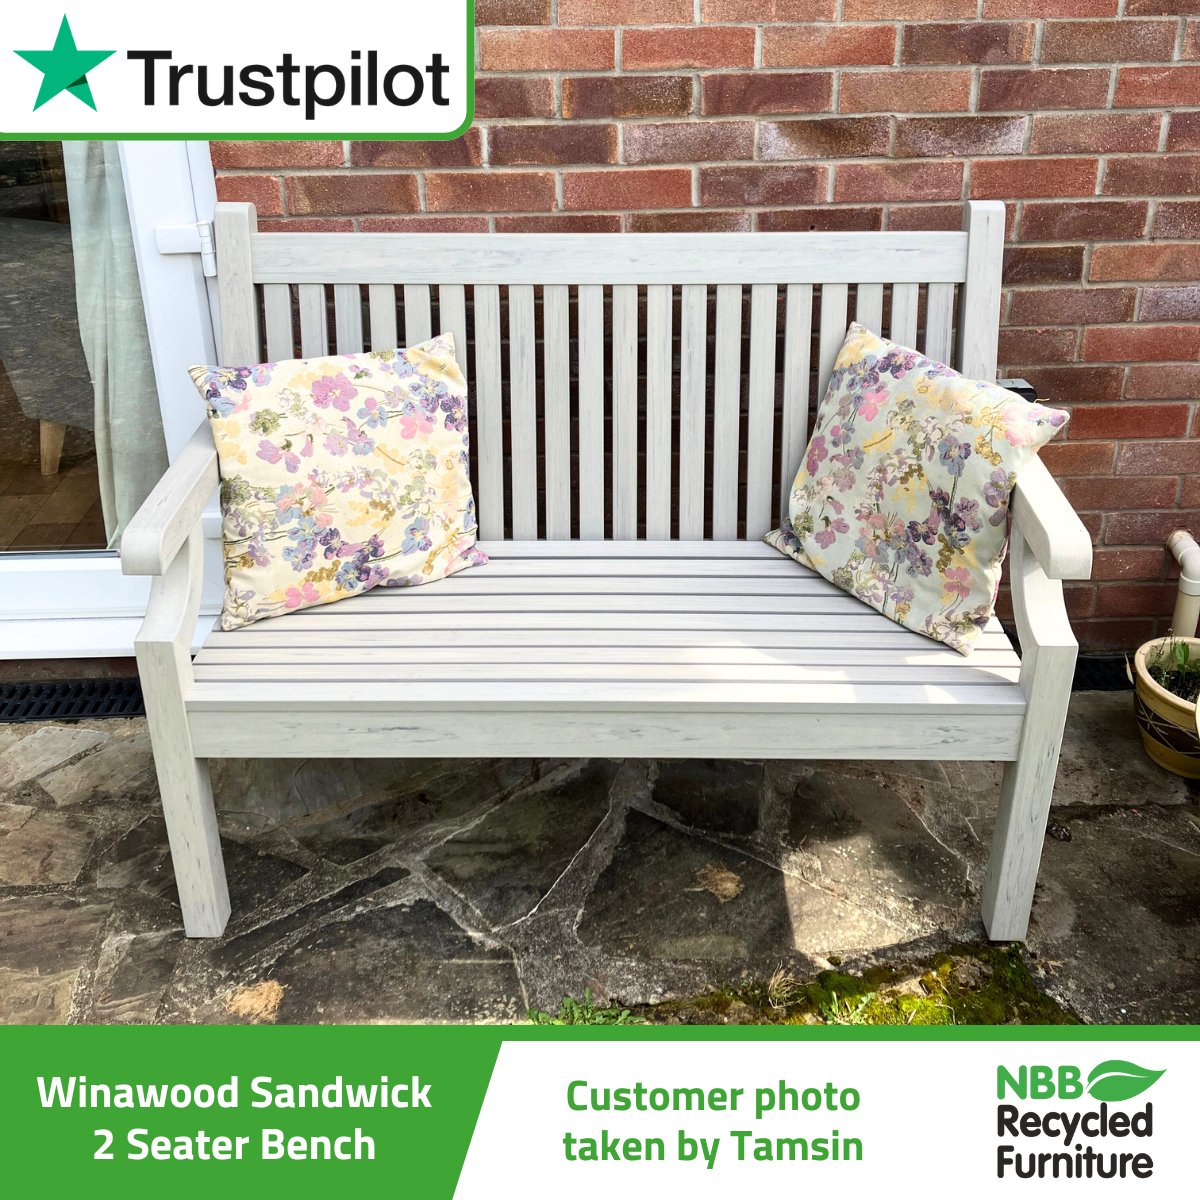 Thank you Tamsin for your lovely review & photo! 'Great product. Looks and feels like wood. Easy to put together and feels good quality.' See Trustpilot link: bit.ly/3ycEnV3 View the product: bit.ly/4diBYdr #NBBRecycledFurniture #5stars #Trustpilot #bench